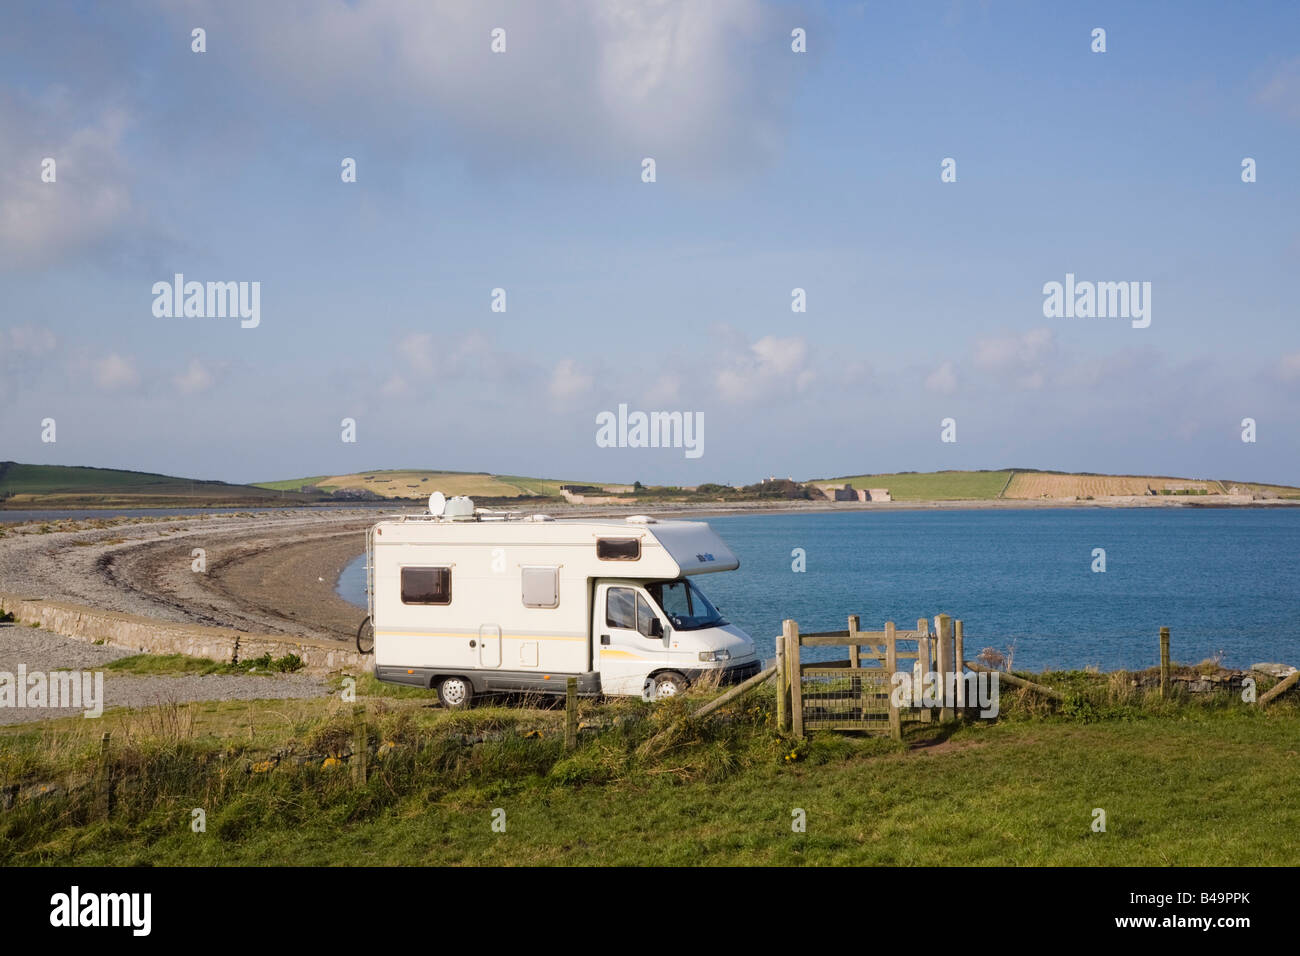 Motorhome parked at seaside by beach in rural beauty spot on coast. Cemlyn Bay Anglesey Wales UK Britain Stock Photo